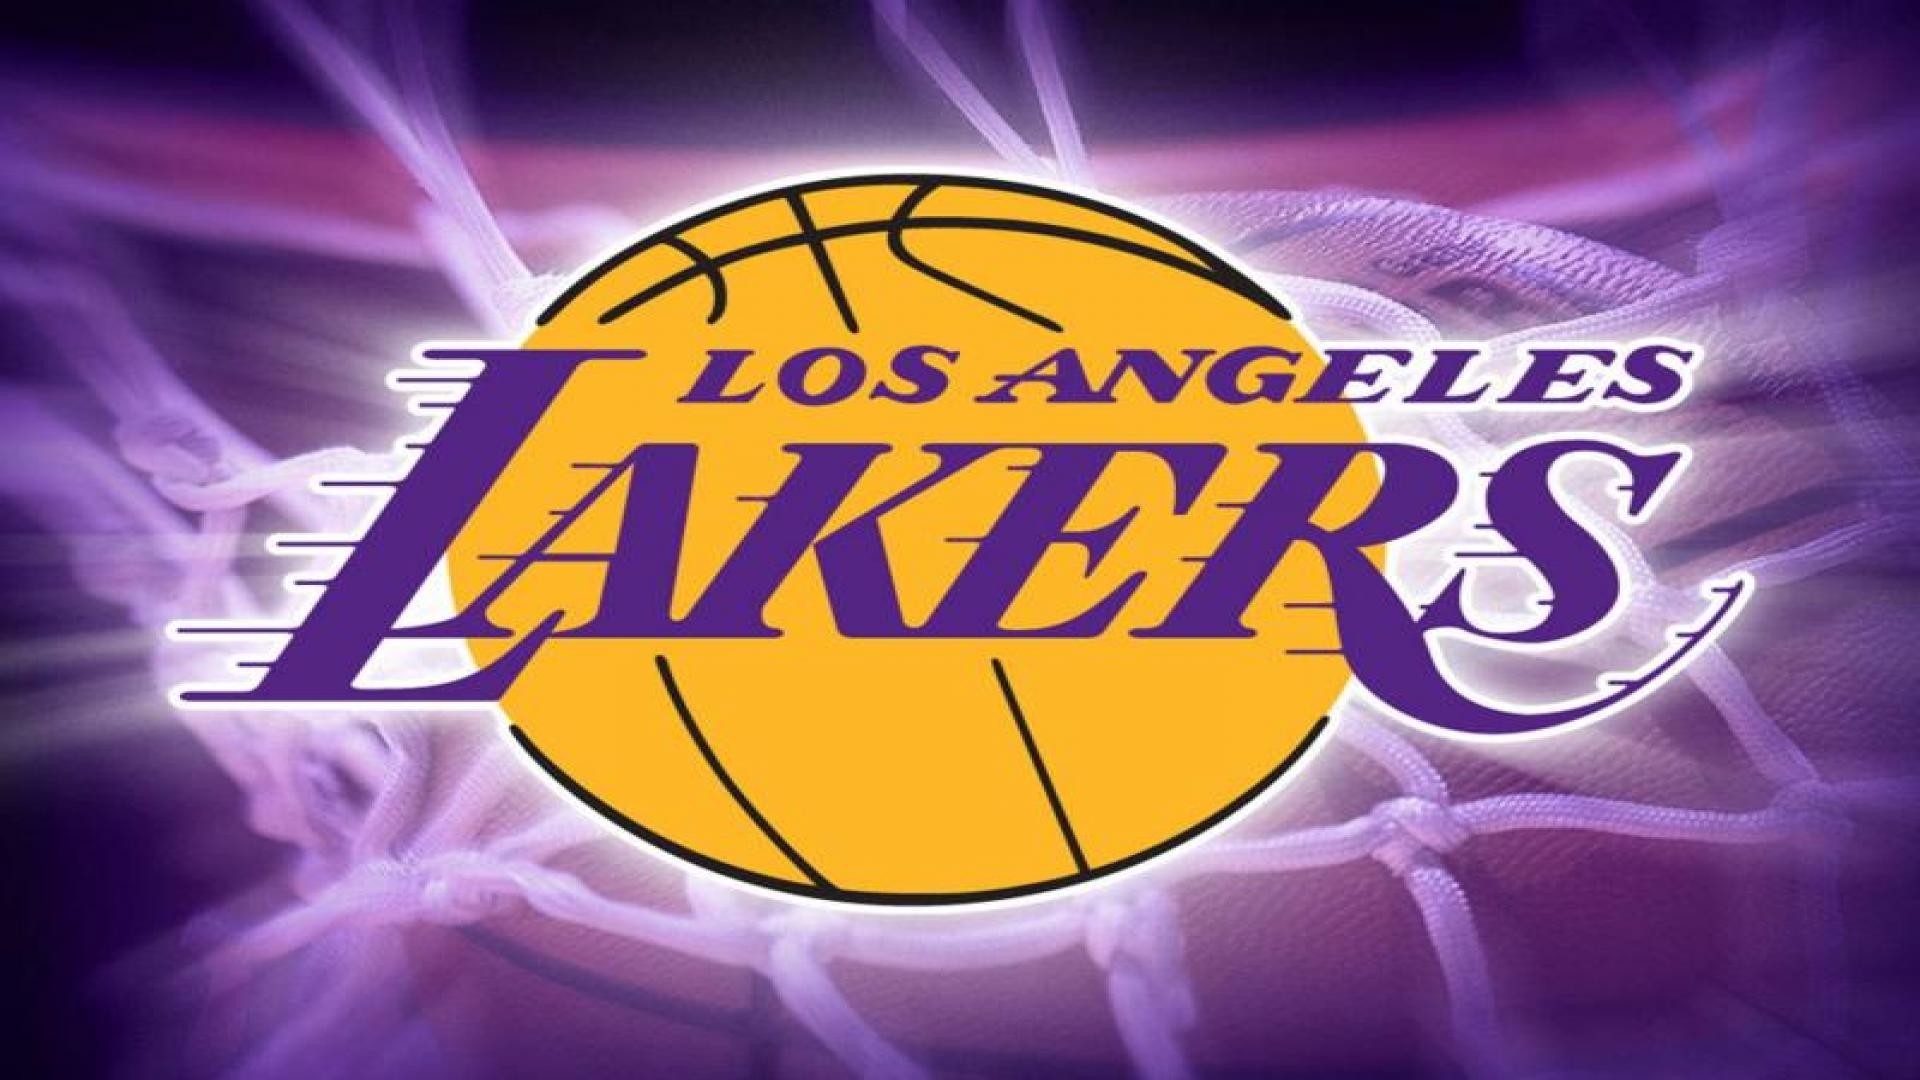 1920x1080 Los Angeles Lakers